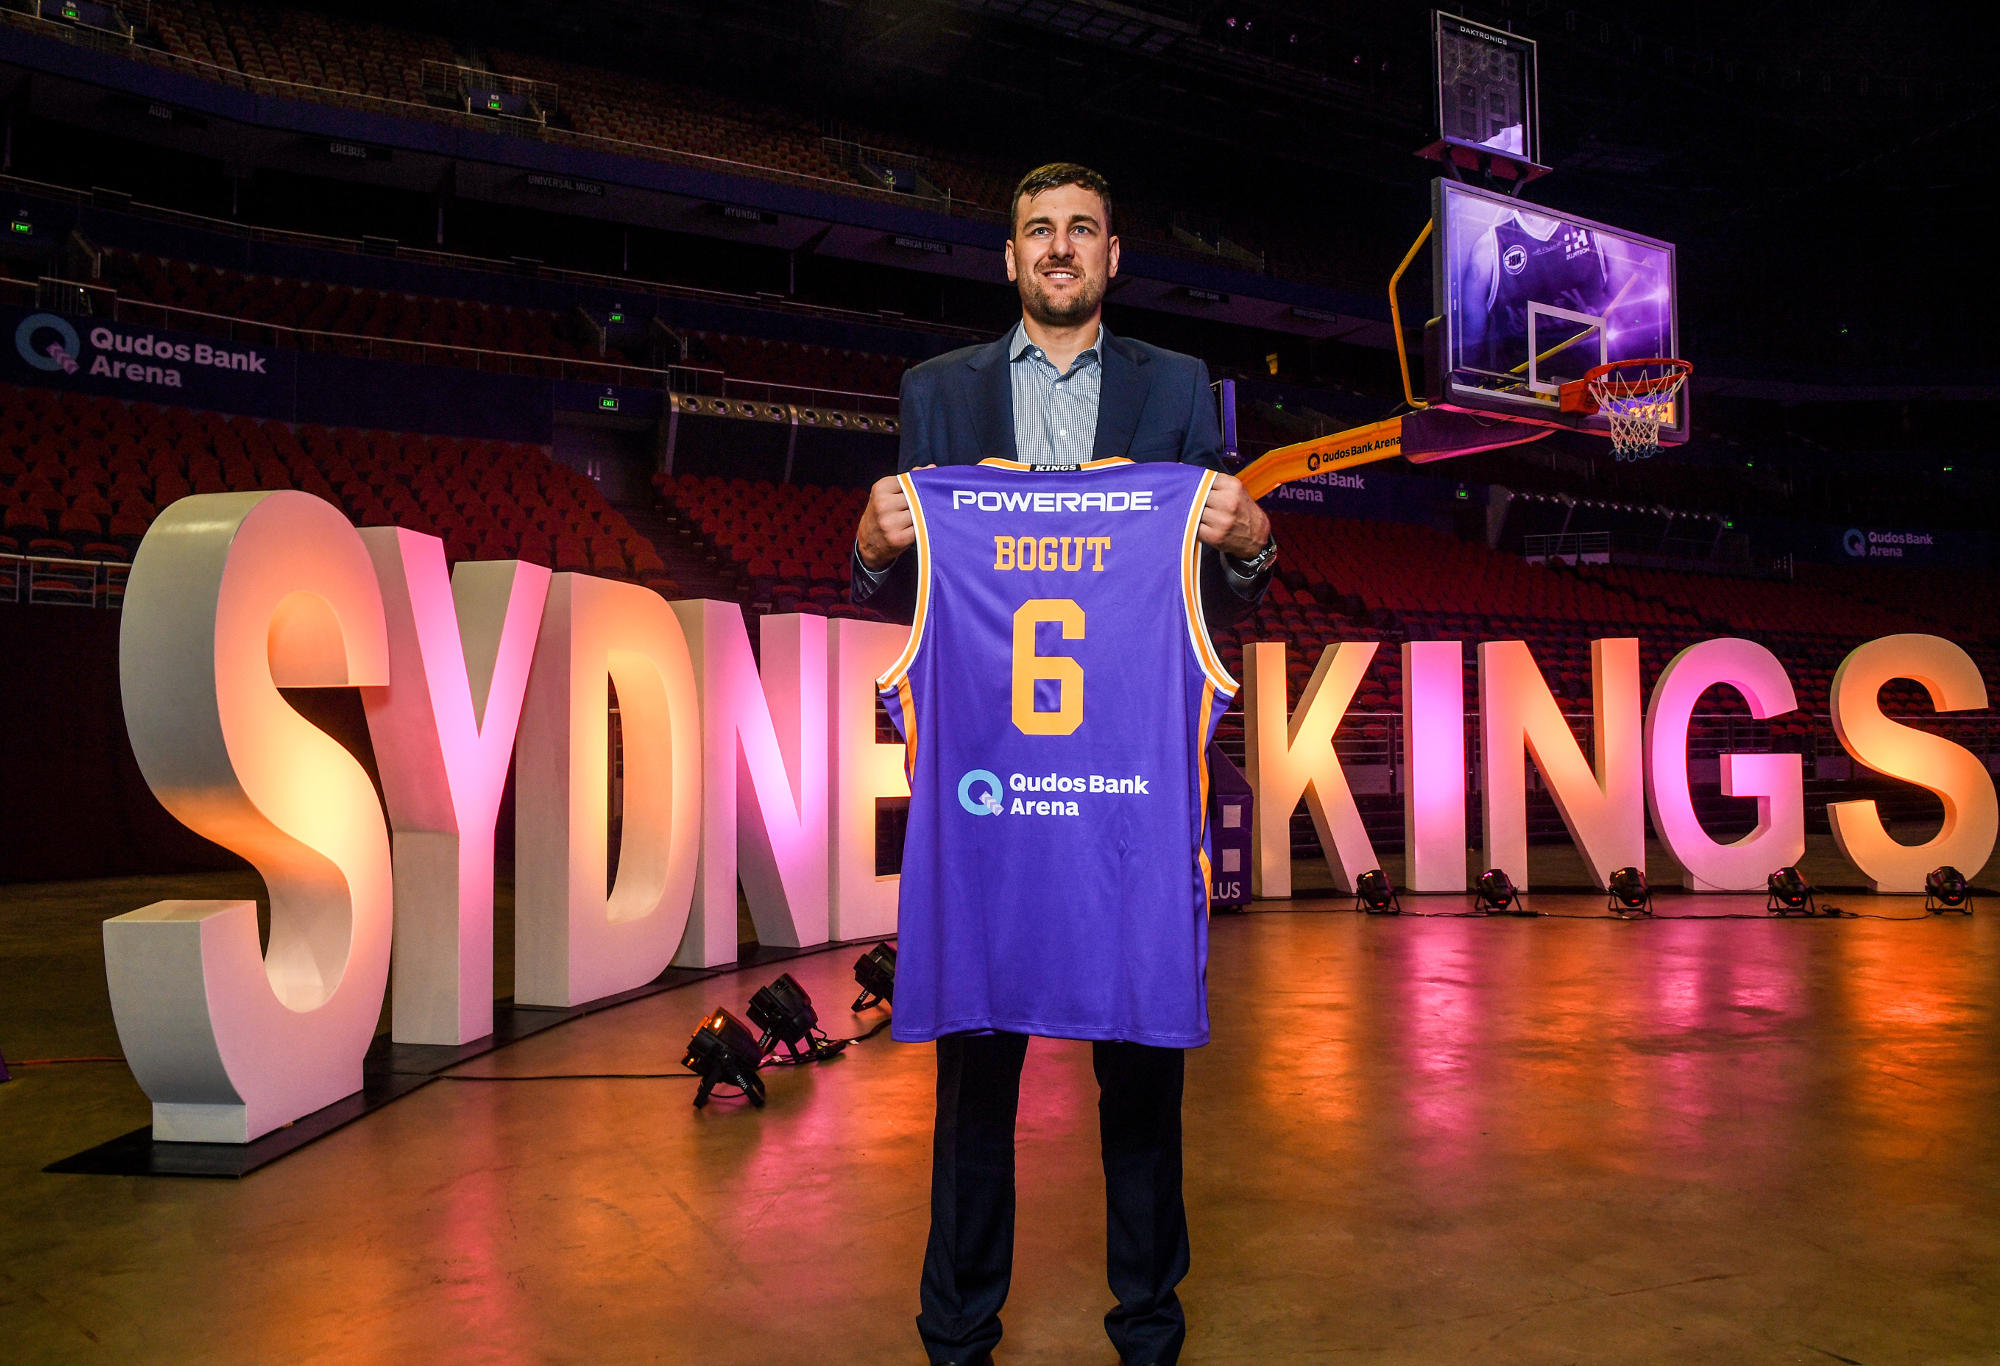 Andrew Bogut signs with Sydney Kings